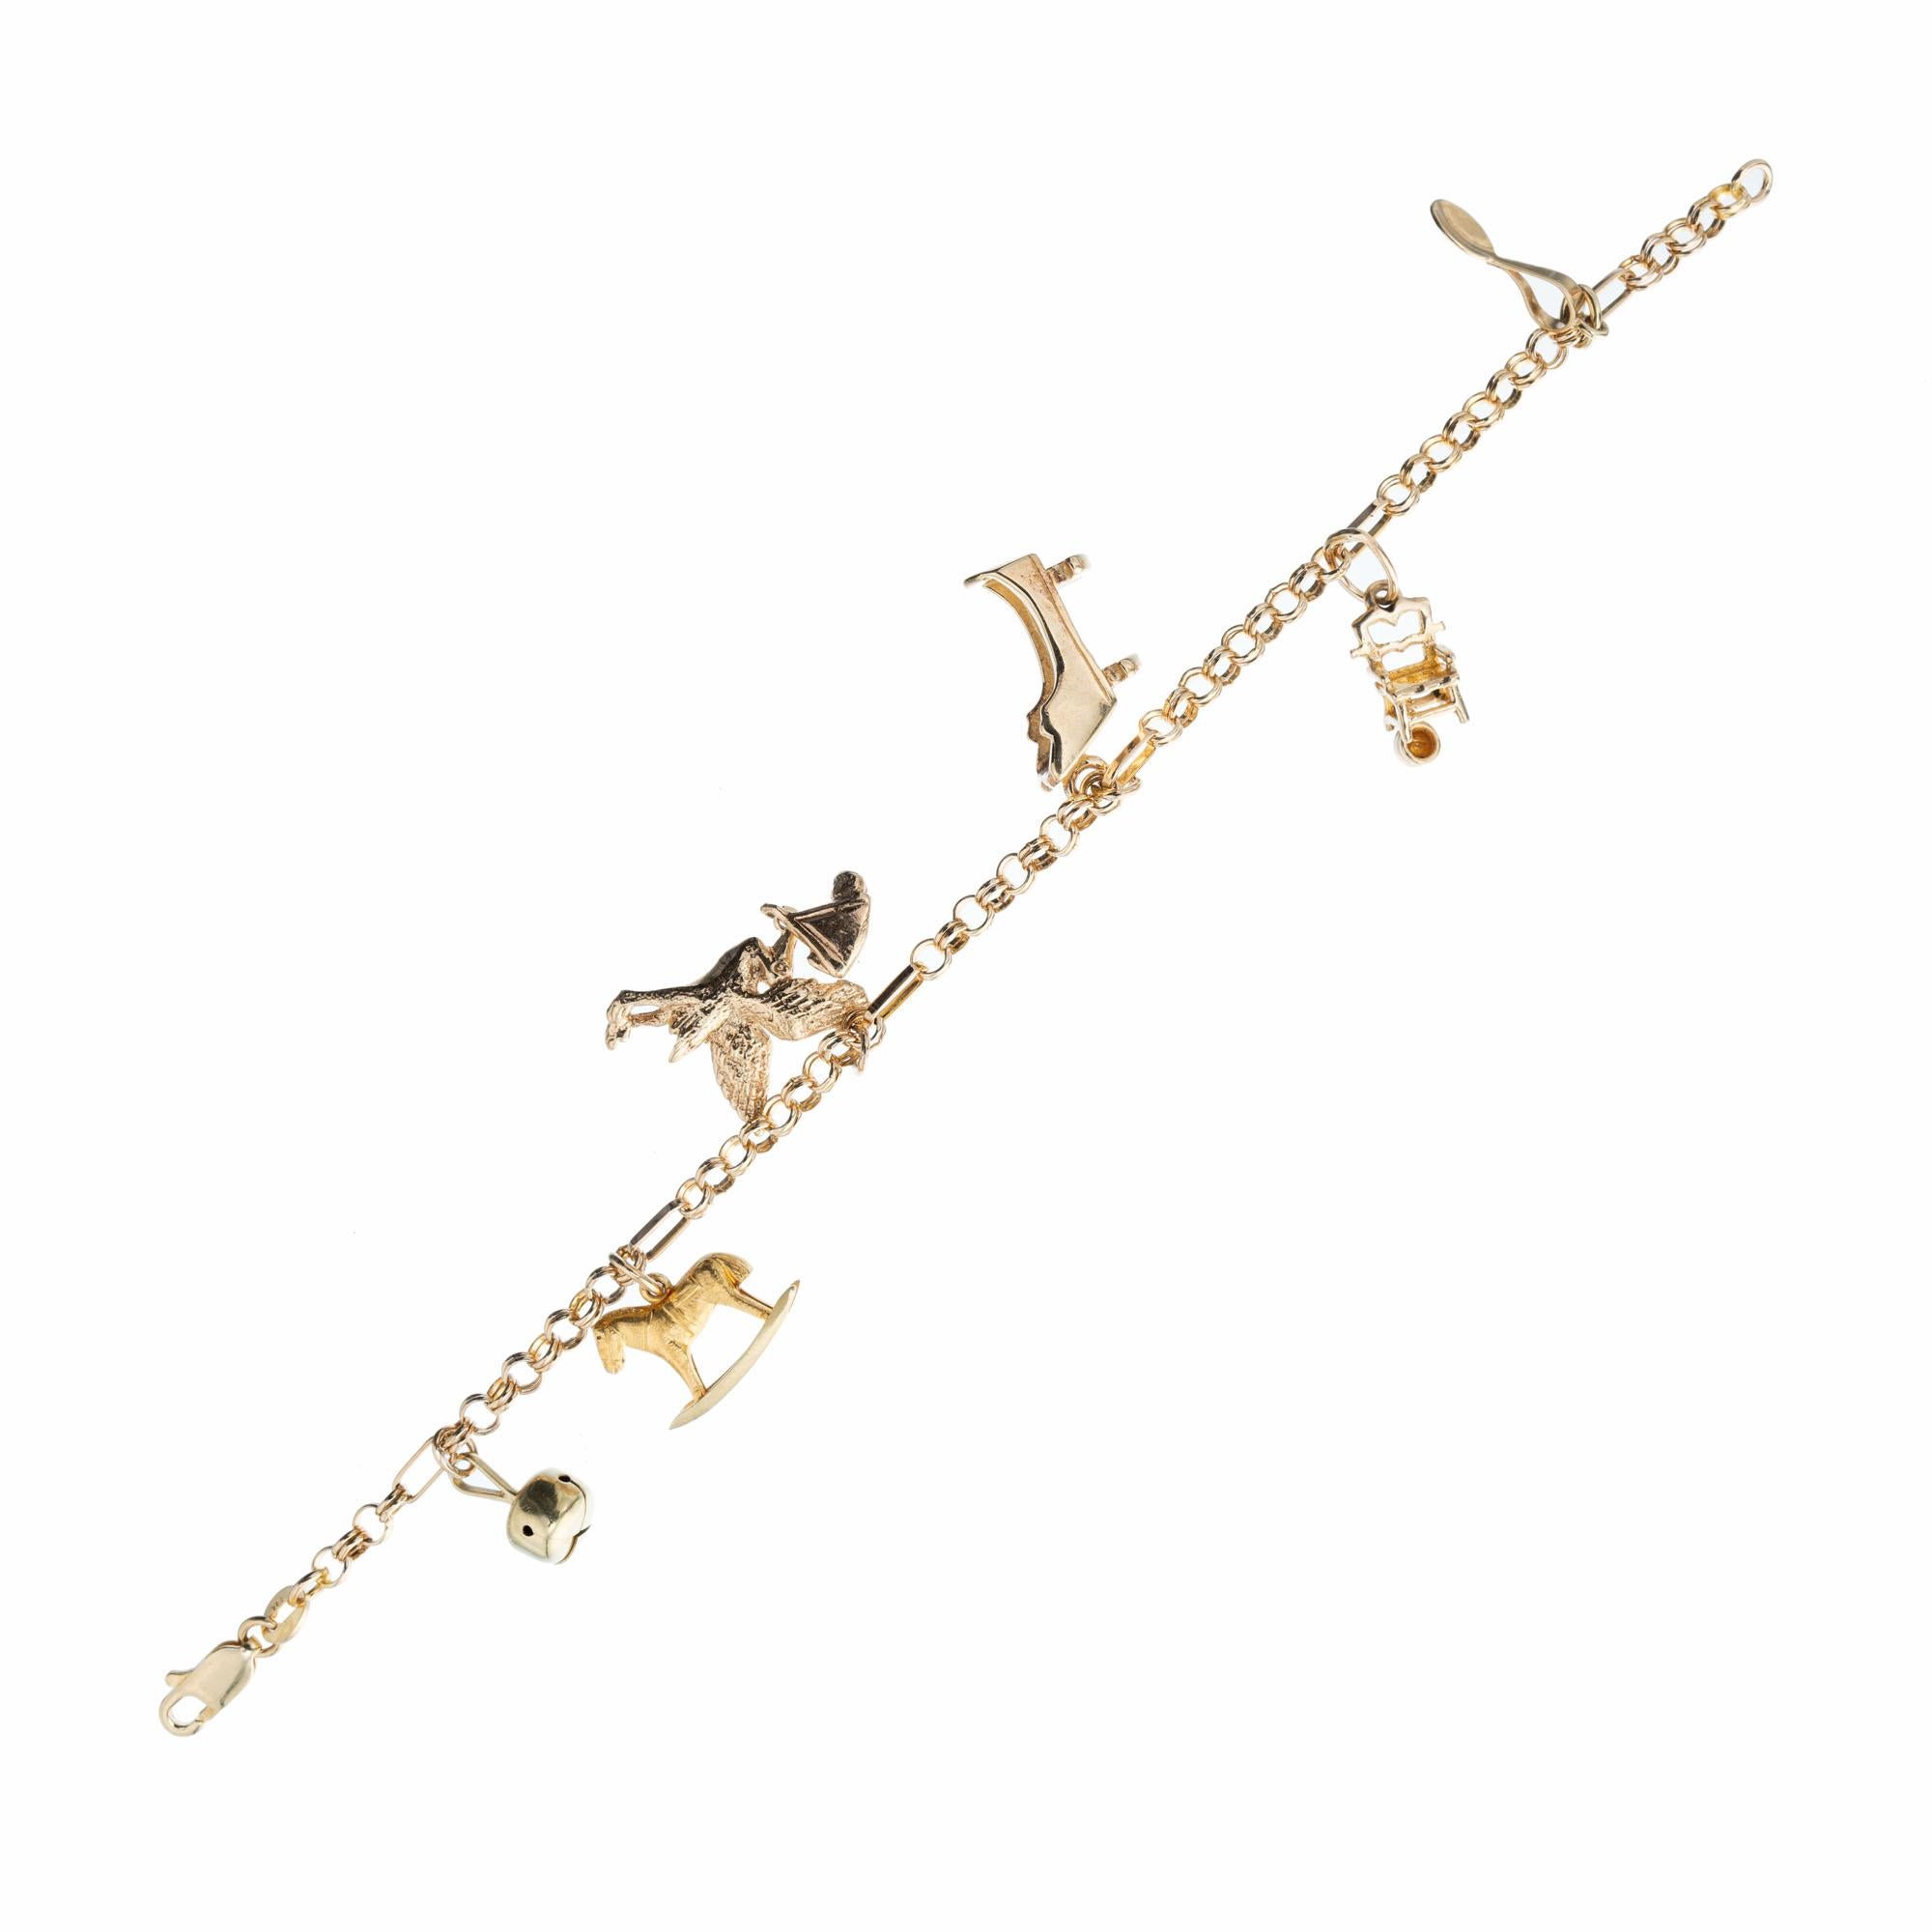 Mid-Century 1960's 14k yellow gold baby themed charm bracelet with baby rattle, rocking horse, stork, bassinet, potty seat and spoon charms. Secure lobster catch. 7 inches in length. 

14k yellow gold 
Stamped: 14k
15.9 grams
Bracelet: 7